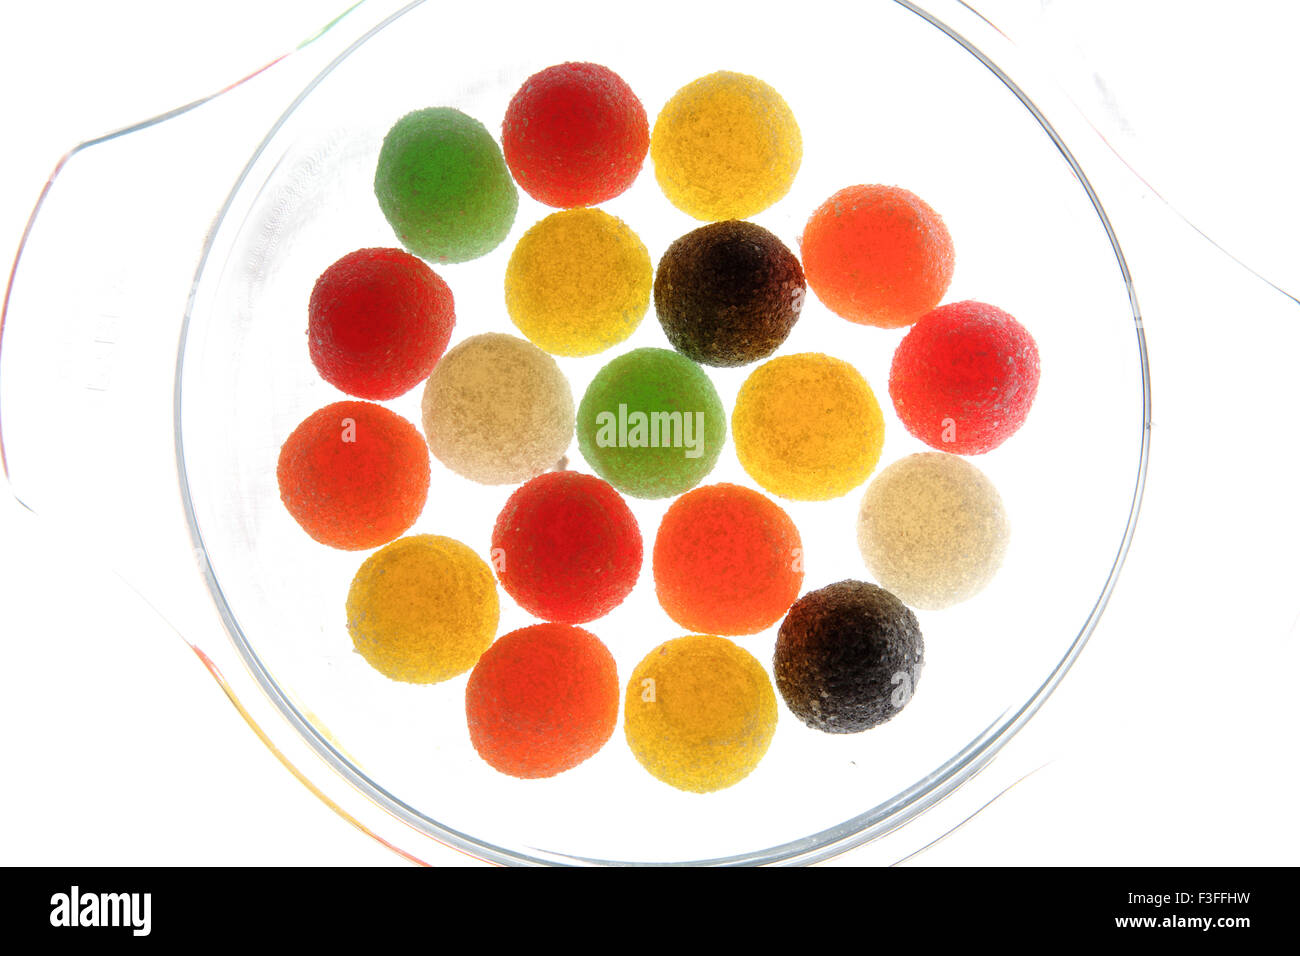 Assortment of American Hard Gums arrangement in transparent tray ; sugar coated colourful soft jelly sweets Stock Photo